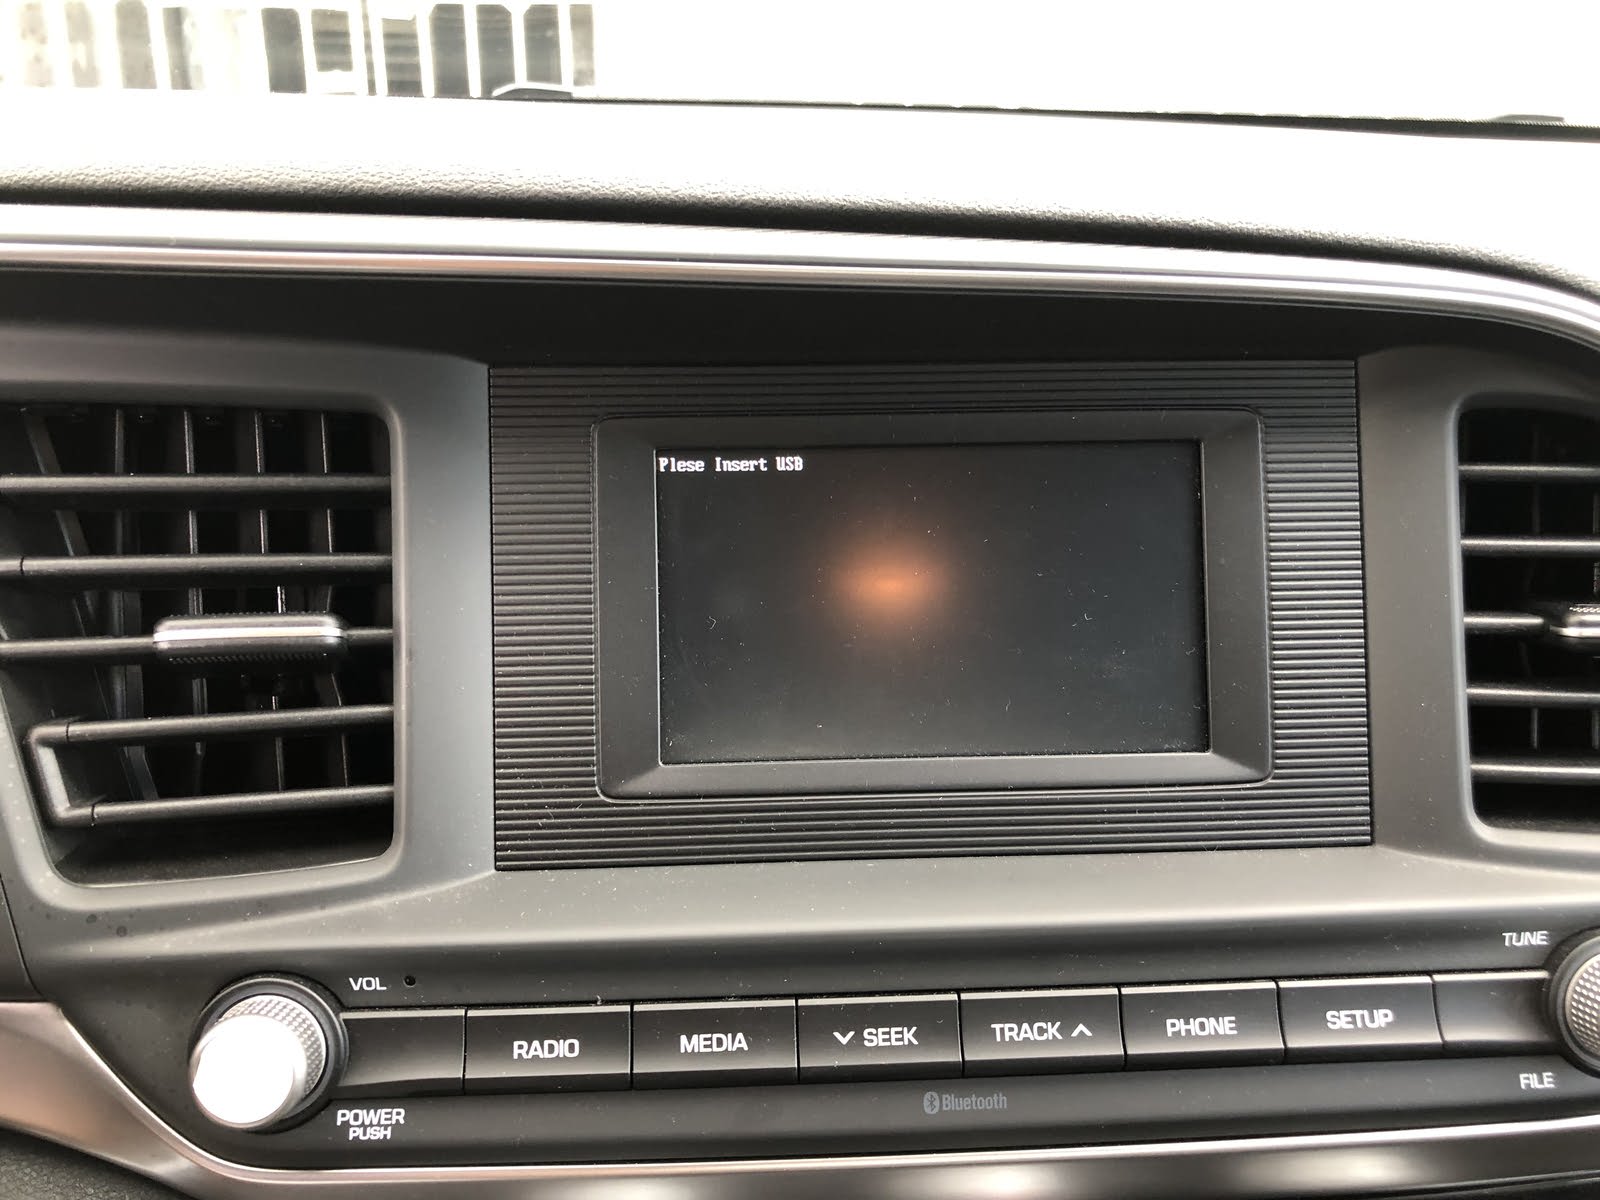 Why Does My Car Stereo Keep Resetting